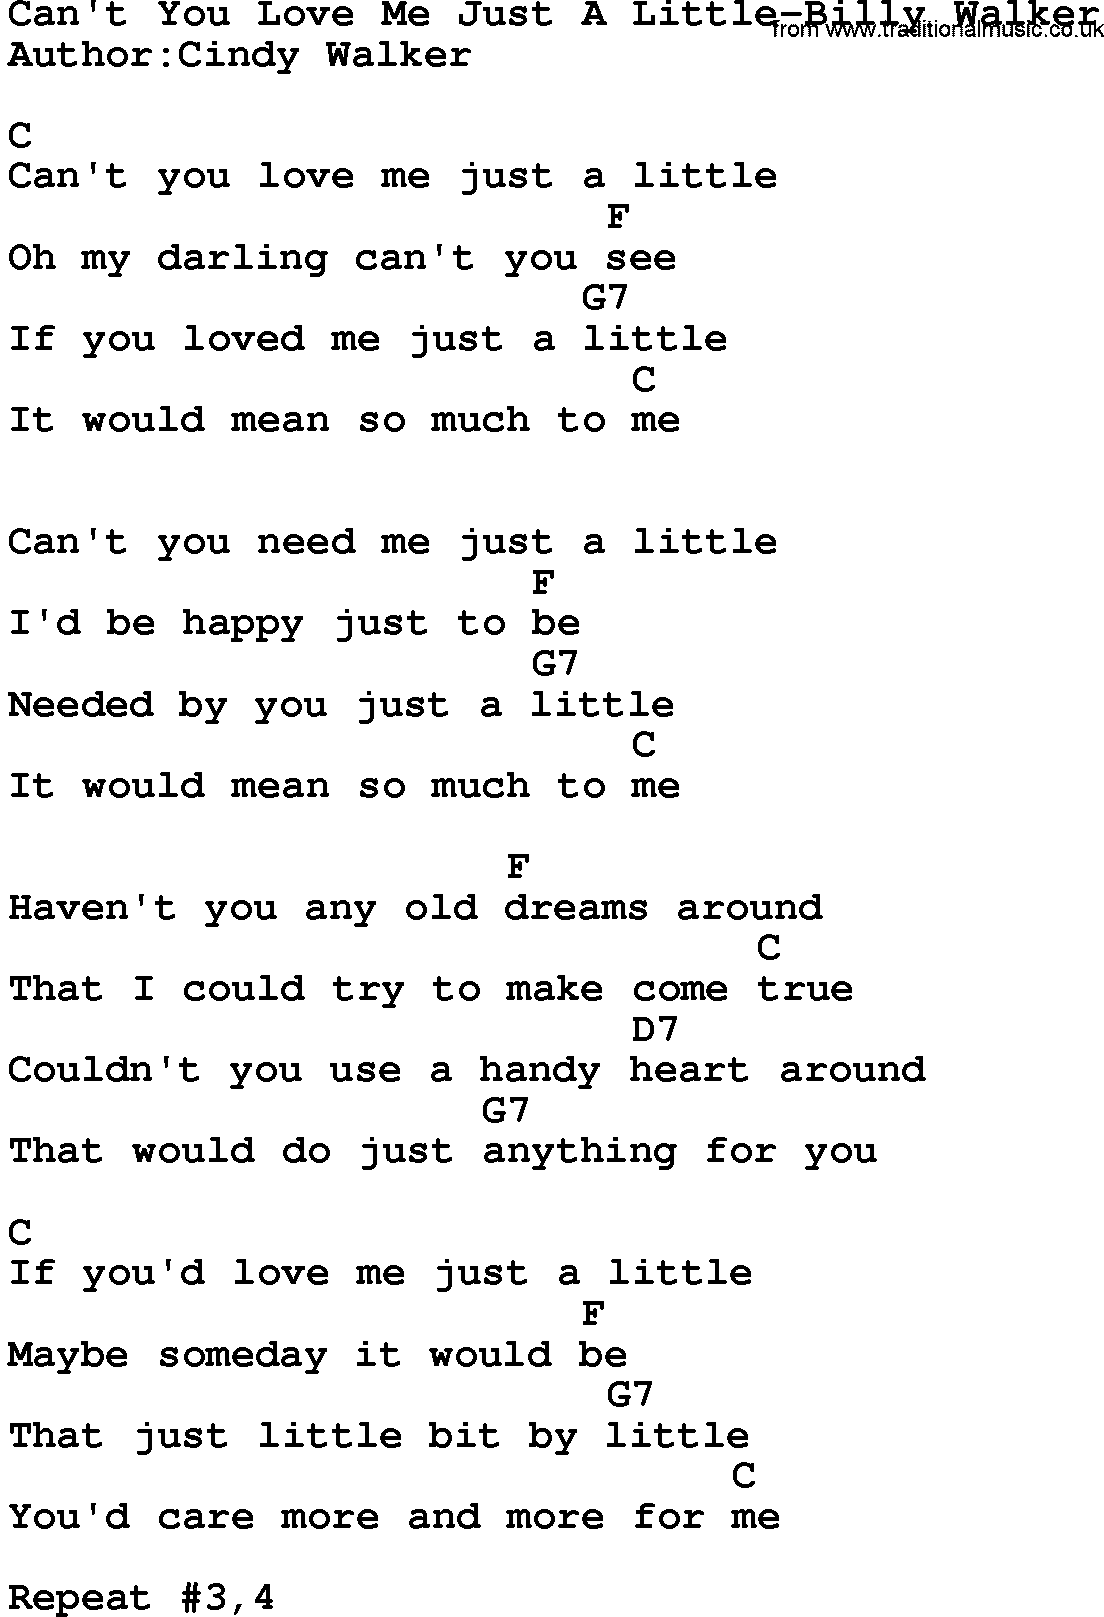 Country music song: Can't You Love Me Just A Little-Billy Walker lyrics and chords